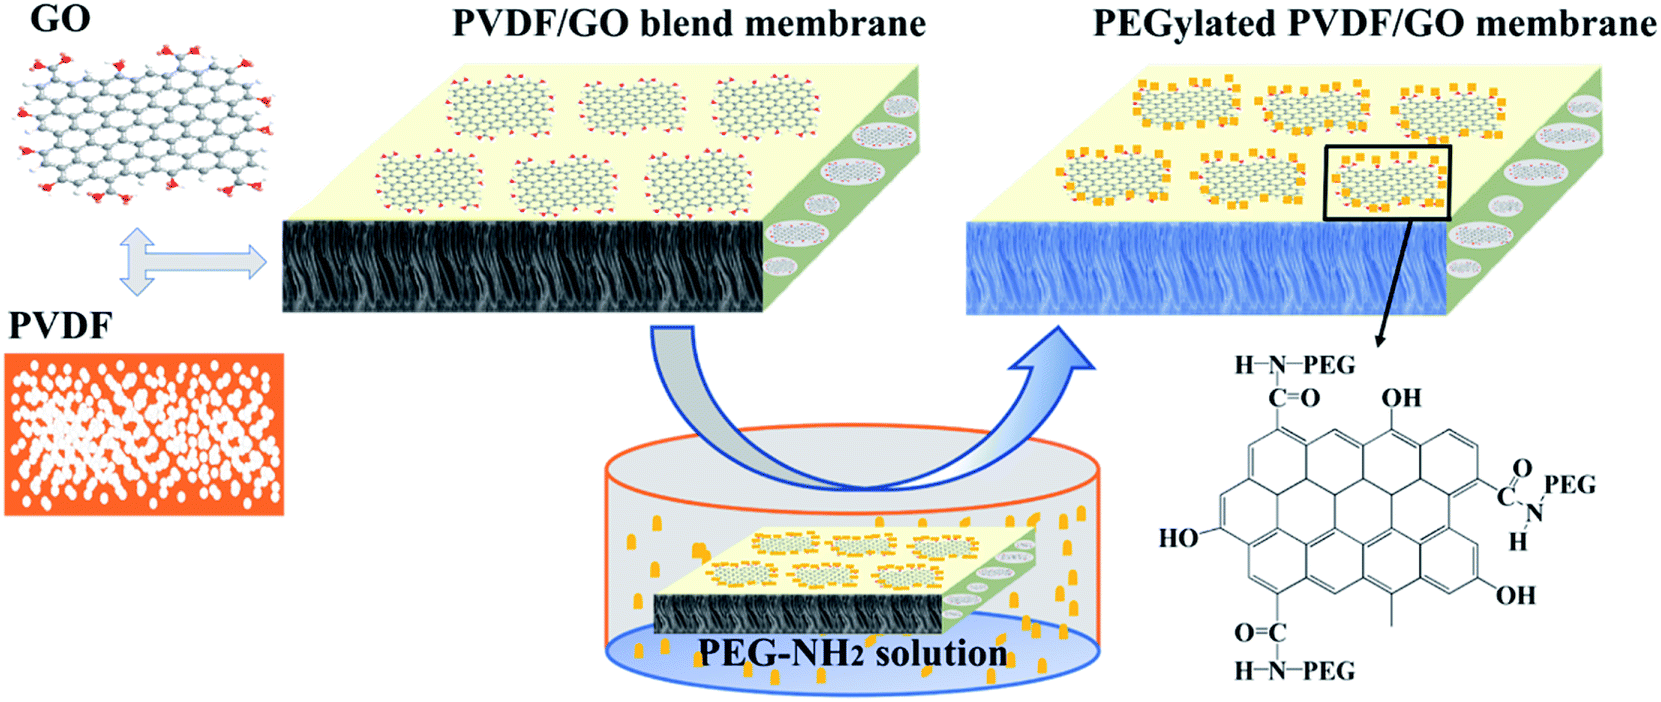 Pegylated Polyvinylidene Fluoride Membranes Via Grafting From A Graphene Oxide Additive For Improving Permeability And Antifouling Properties Rsc Advances Rsc Publishing